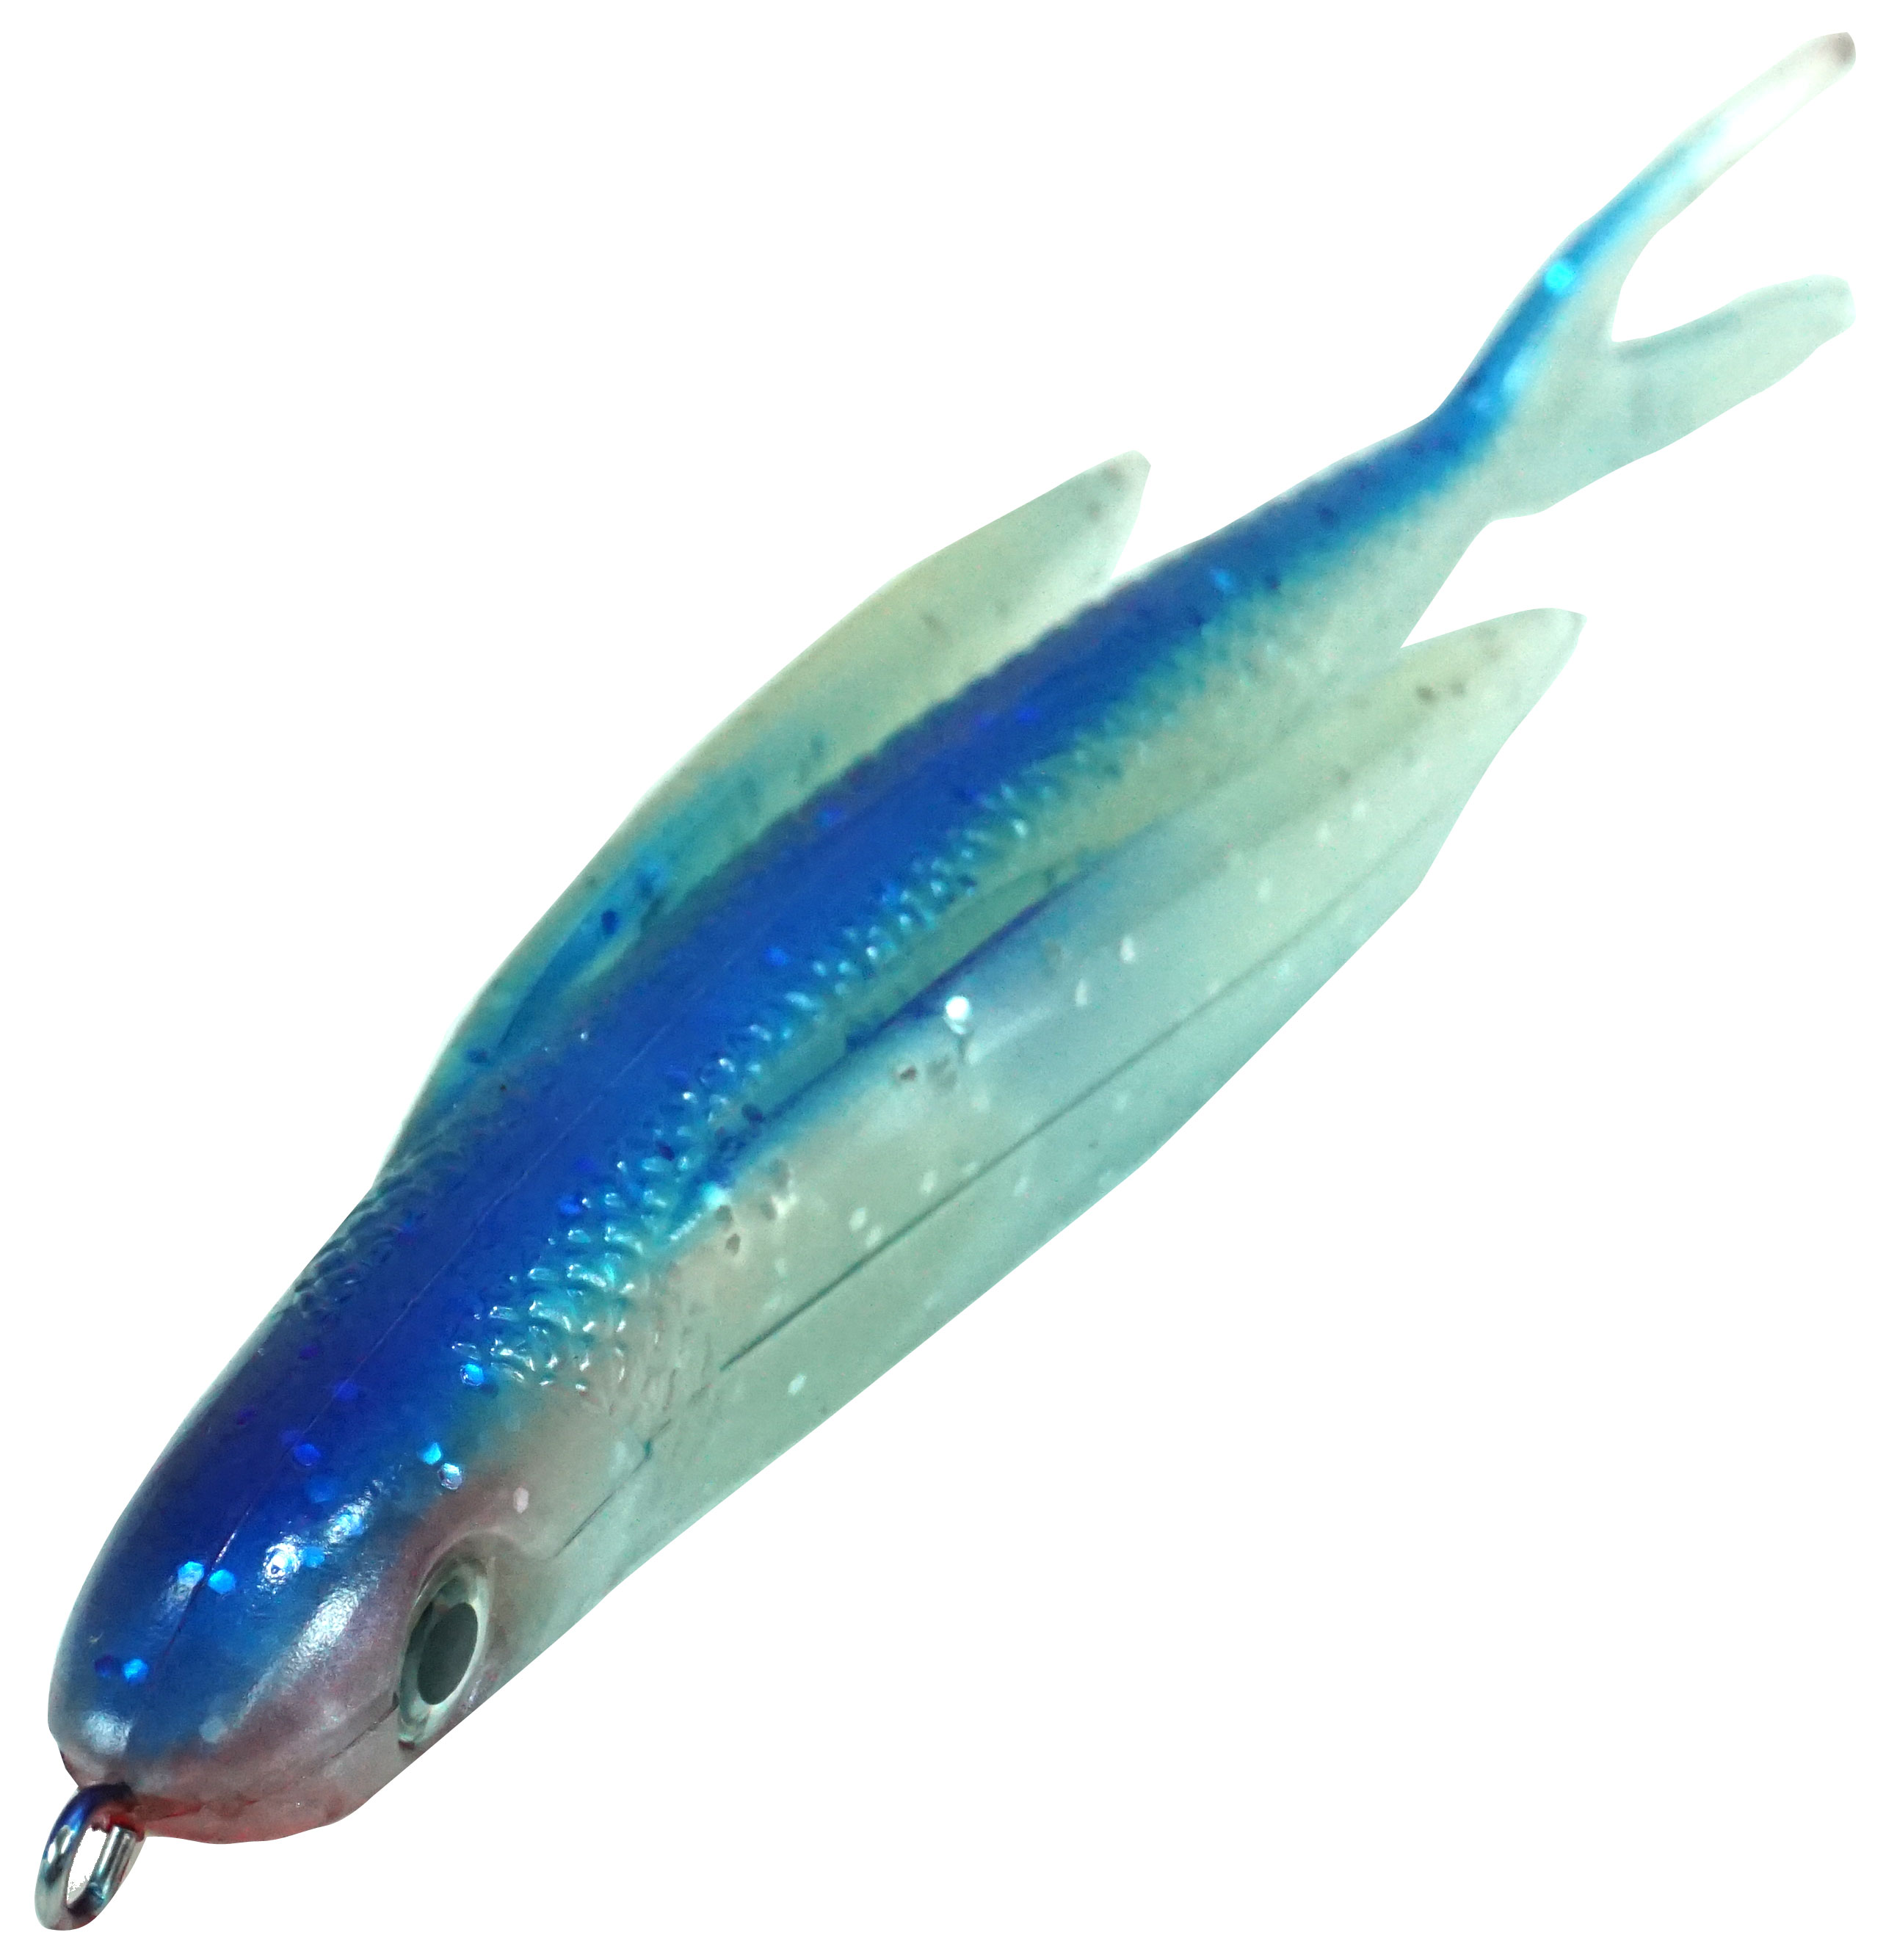 Almost Alive Lures 6" Soft Plastic Flying Fish with Swept Back Wing Bait Blue Back/Red Nose with Spring